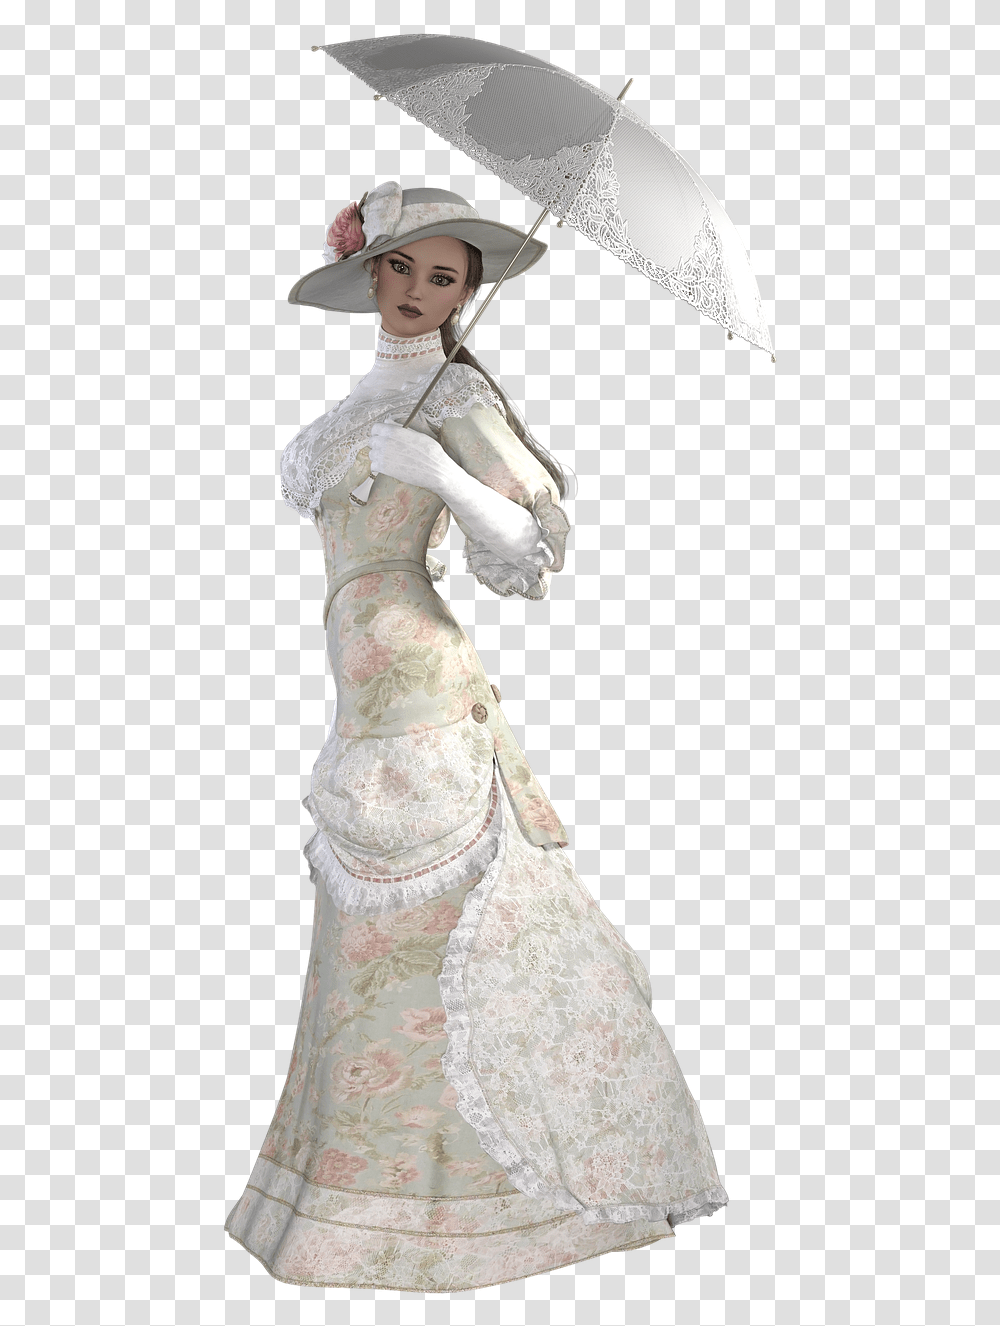 Woman Female Character 3d Model Pose Rendering Victorian Woman, Doll, Toy, Apparel Transparent Png